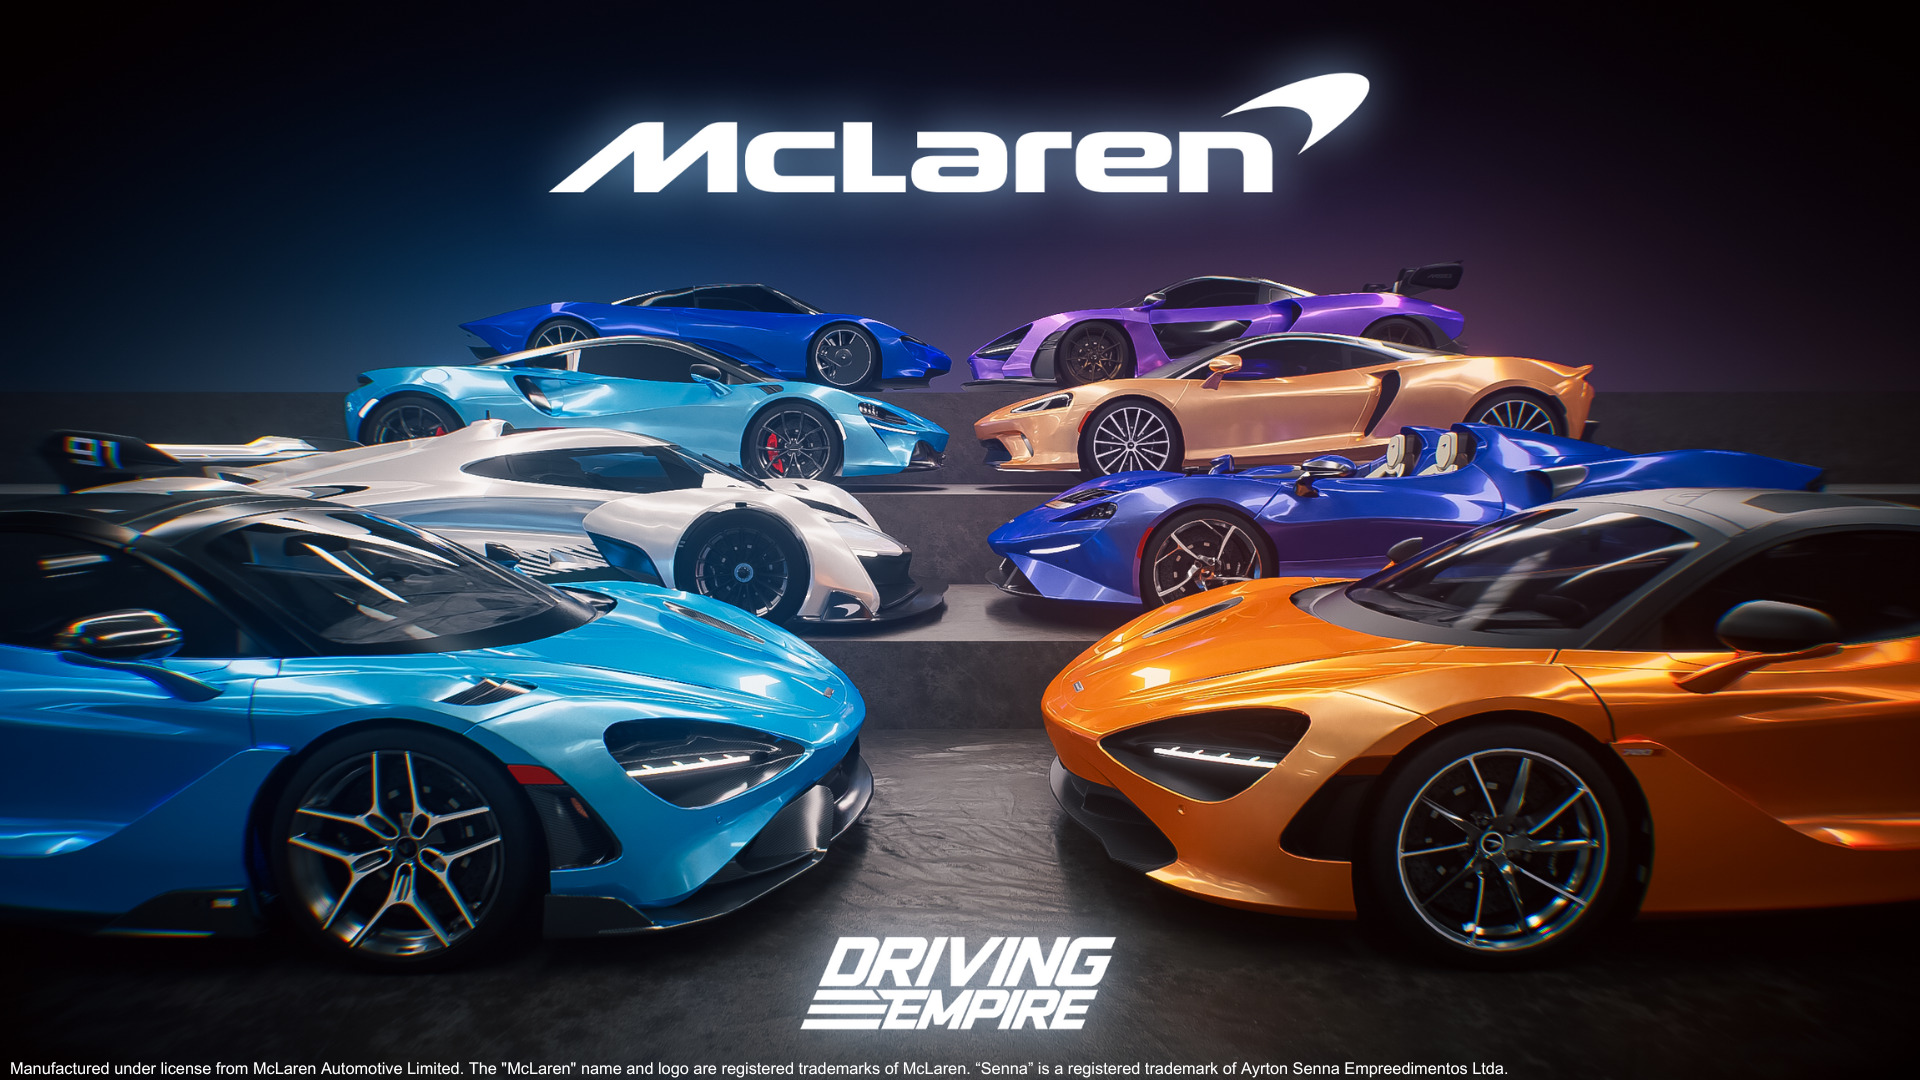 McLaren Accelerates Into Driving Empire With An Exclusive Lineup